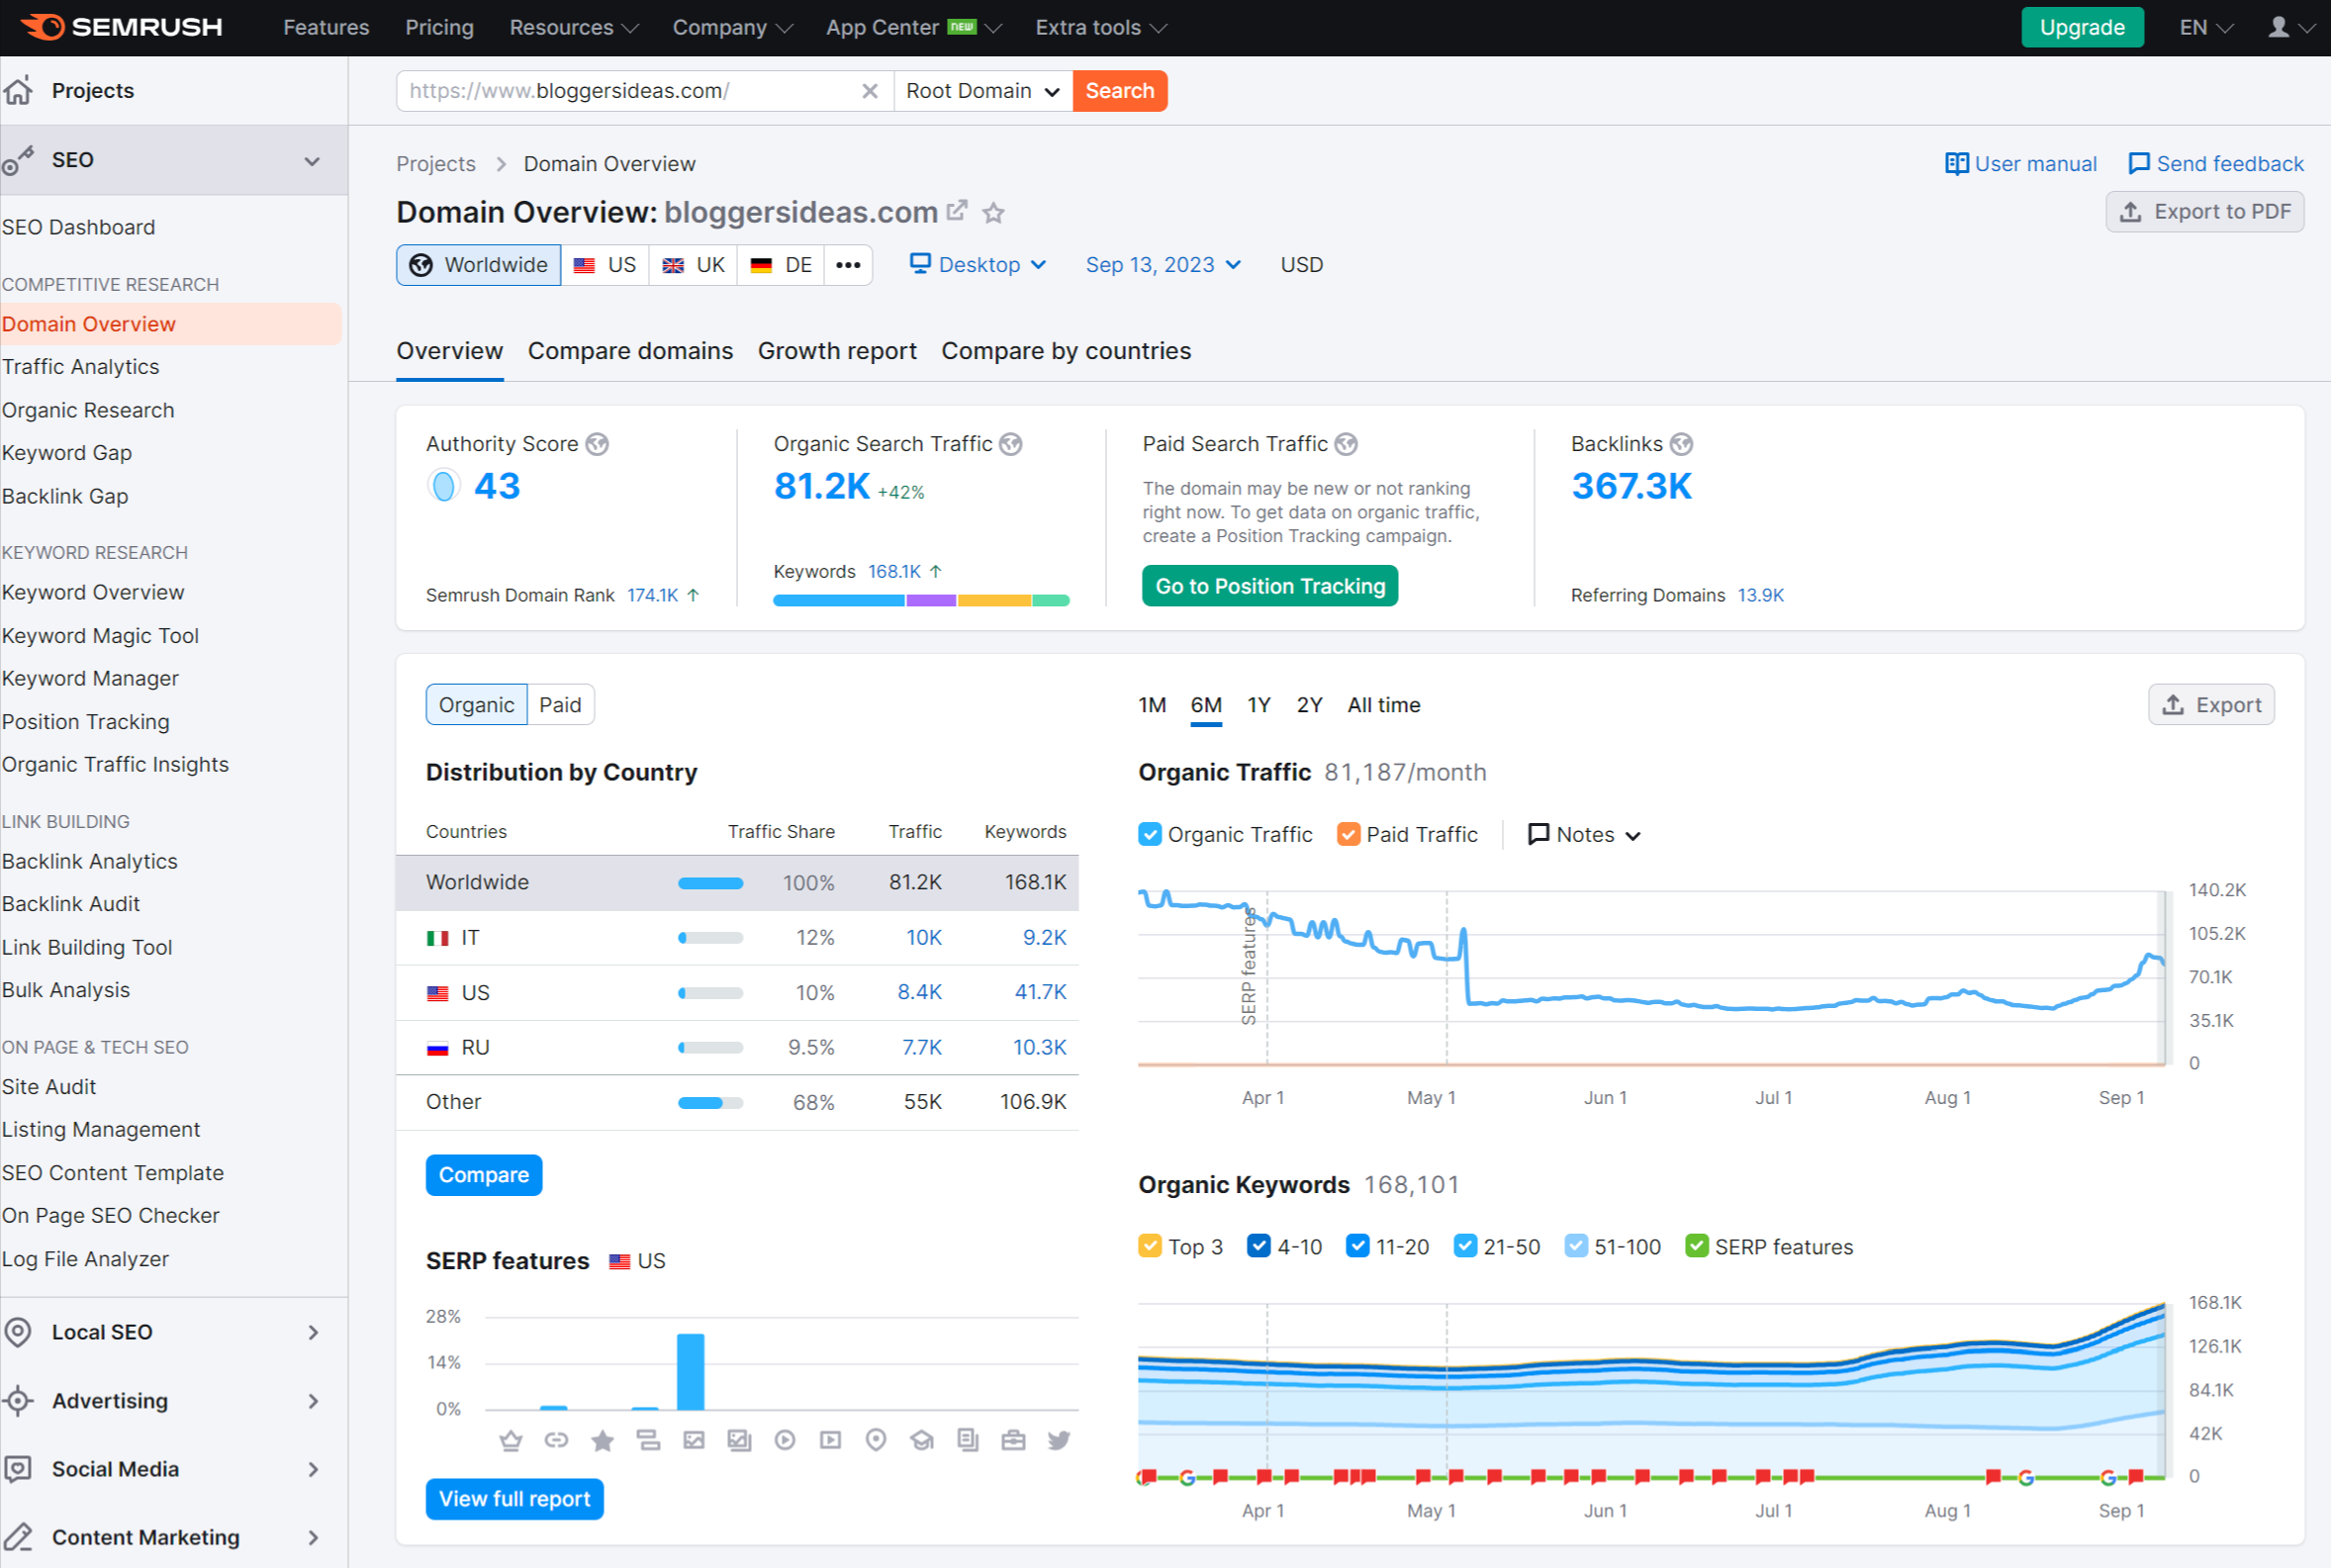 Semrush free trial offer new features